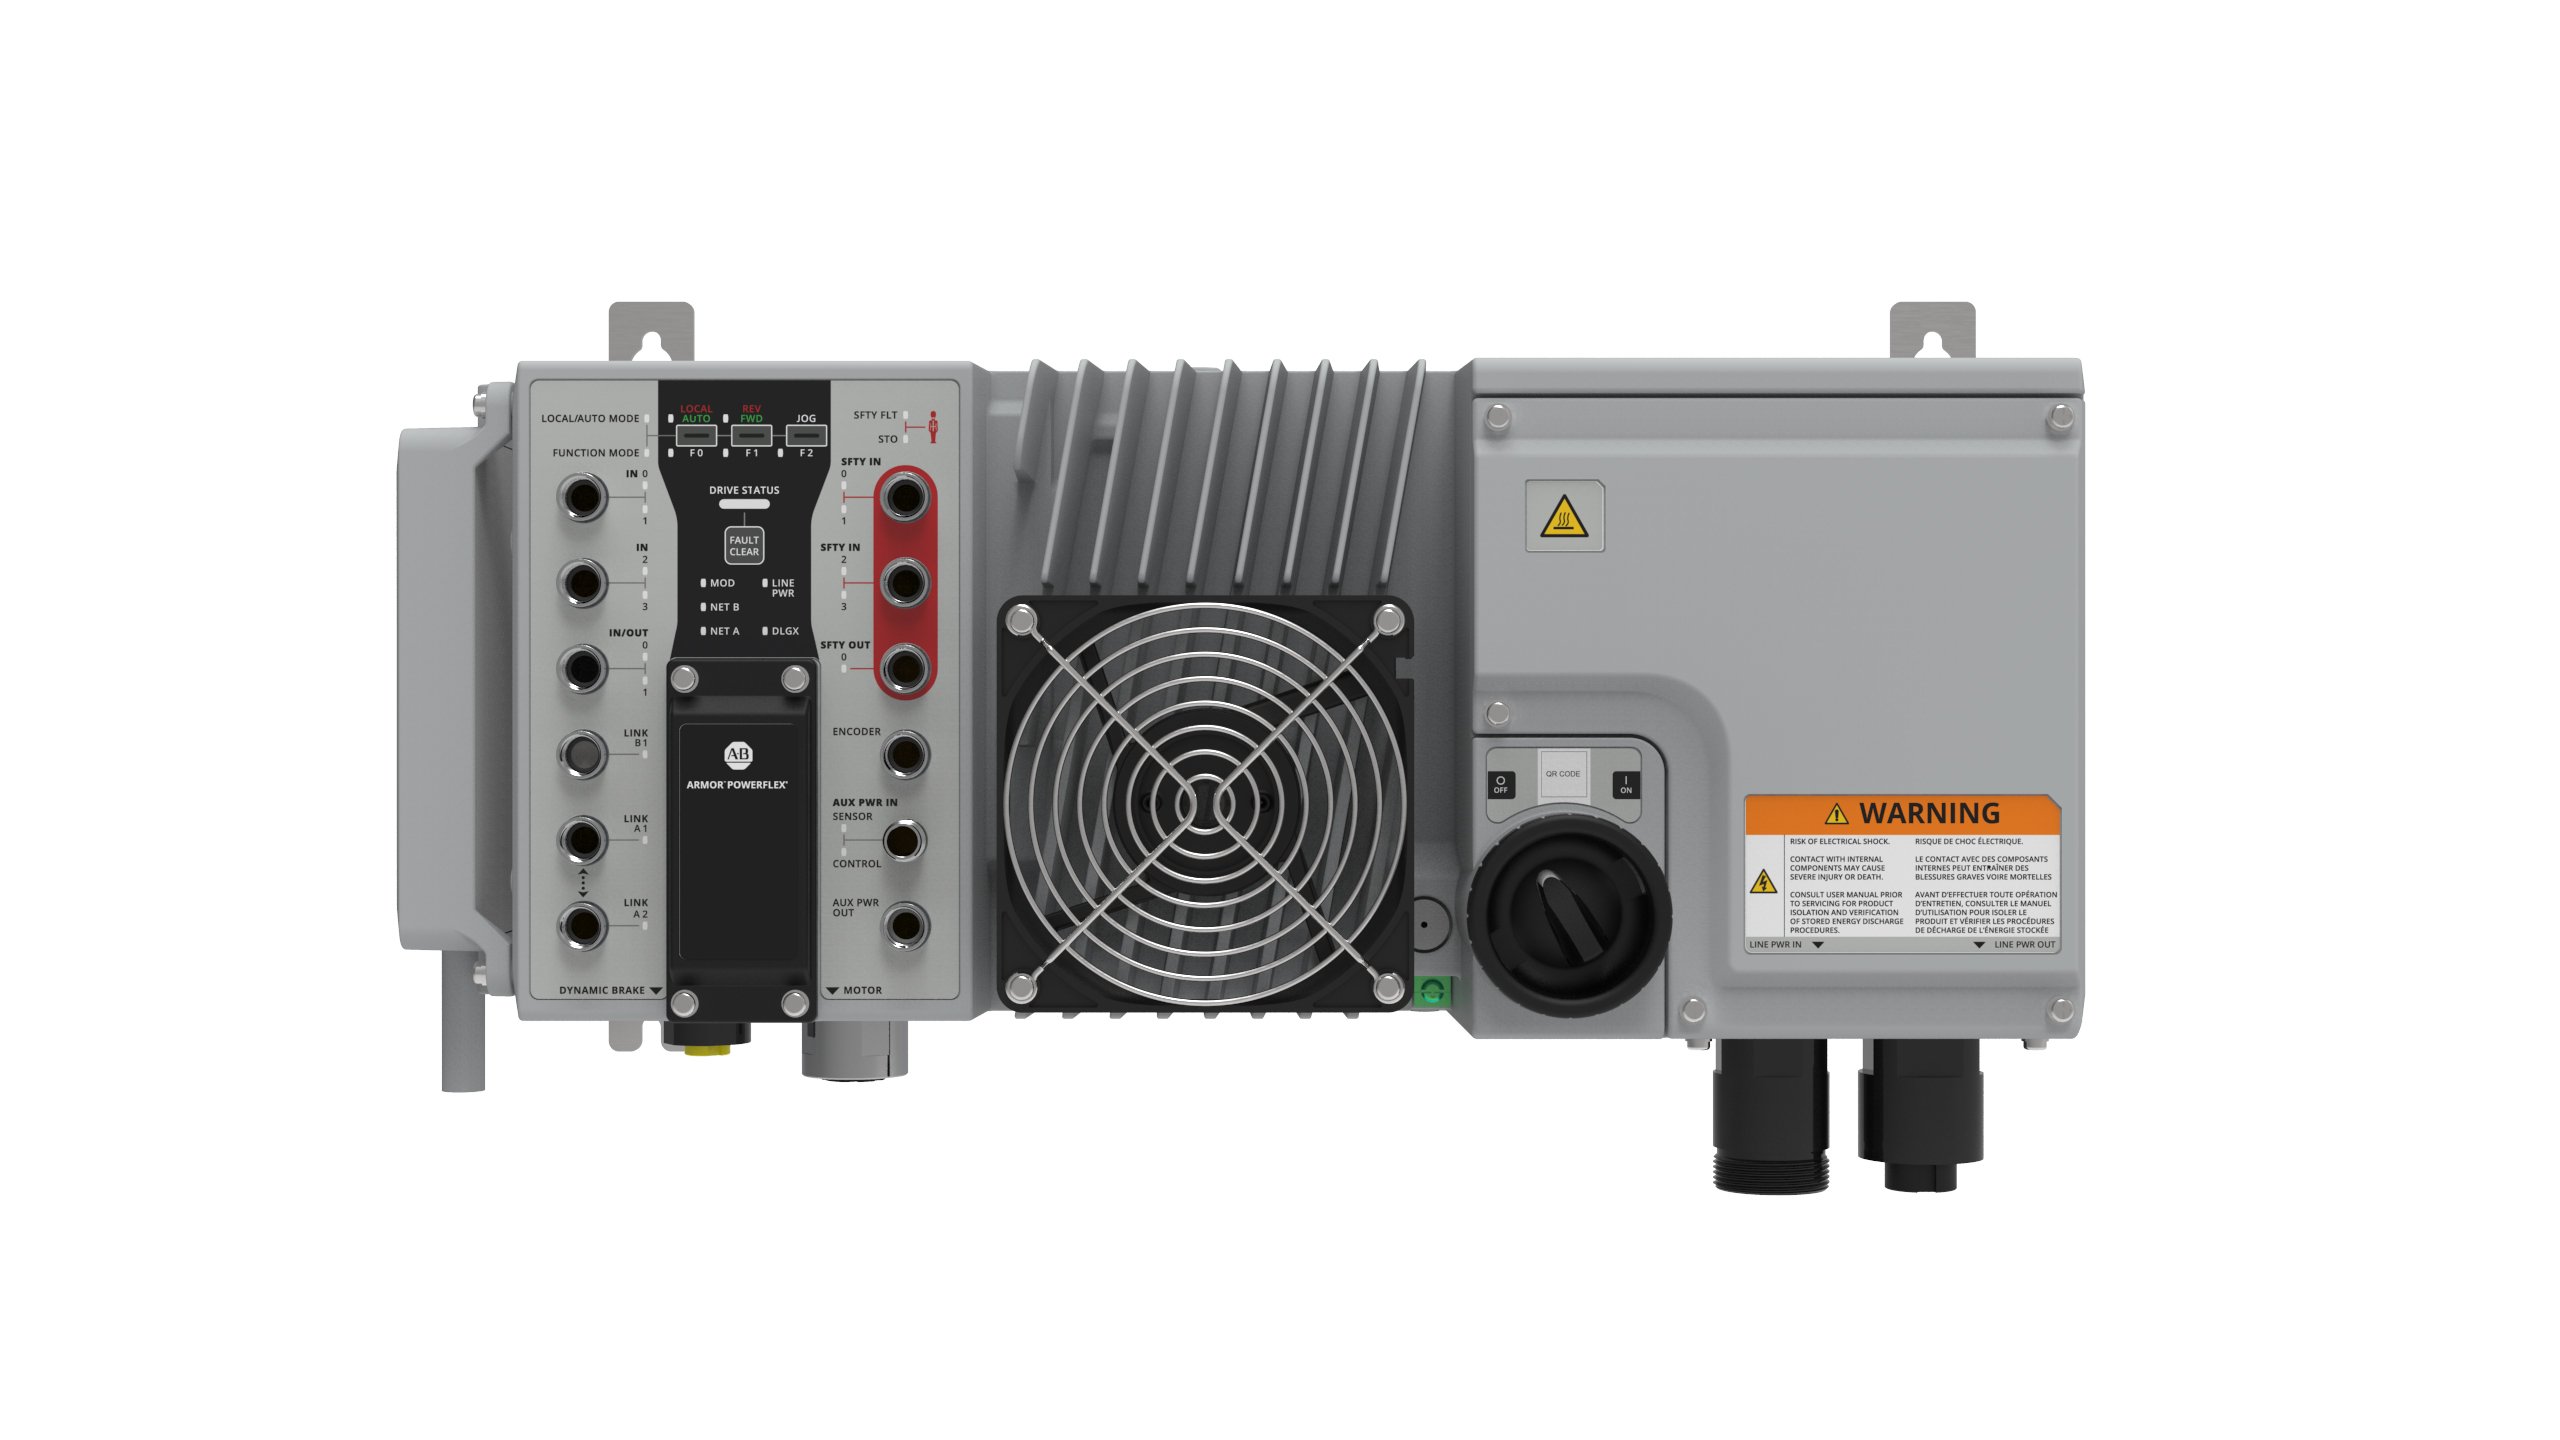 Horizonal view of an Armor PowerFlex Drive. It is gray in color with black text. There are several input holes on the left side. There is a fan in the middle. A round knob sits on the right side.